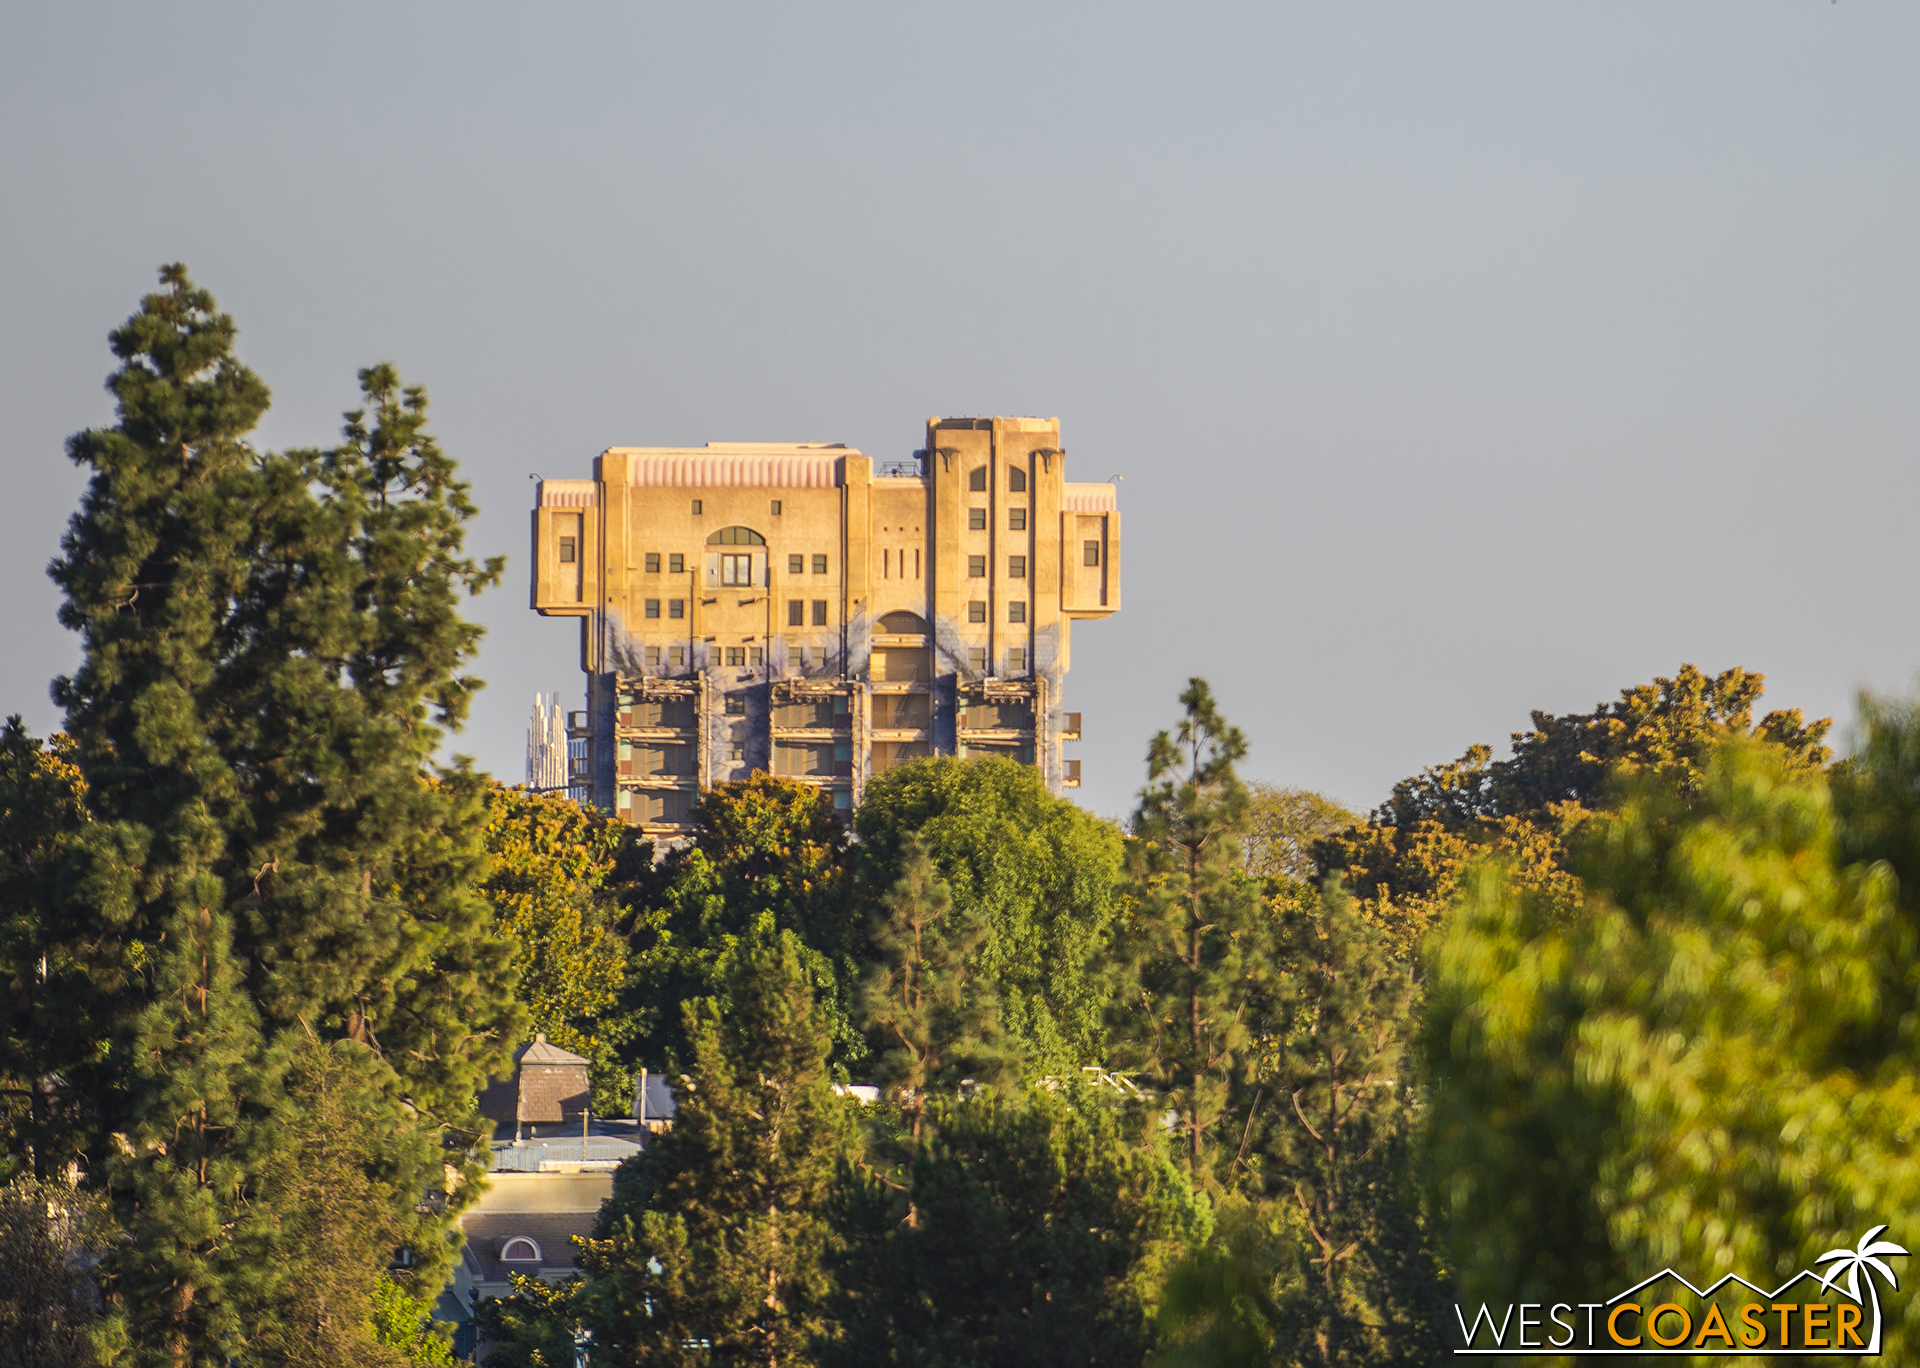  Whatever you think about the  Guardians  makeover (I'm not particularly fond of it myself, given that Hollywood Land won't be fully transformed into a Marvel themed land anytime soon, and even that eventual transformation will be eroding the re-devi